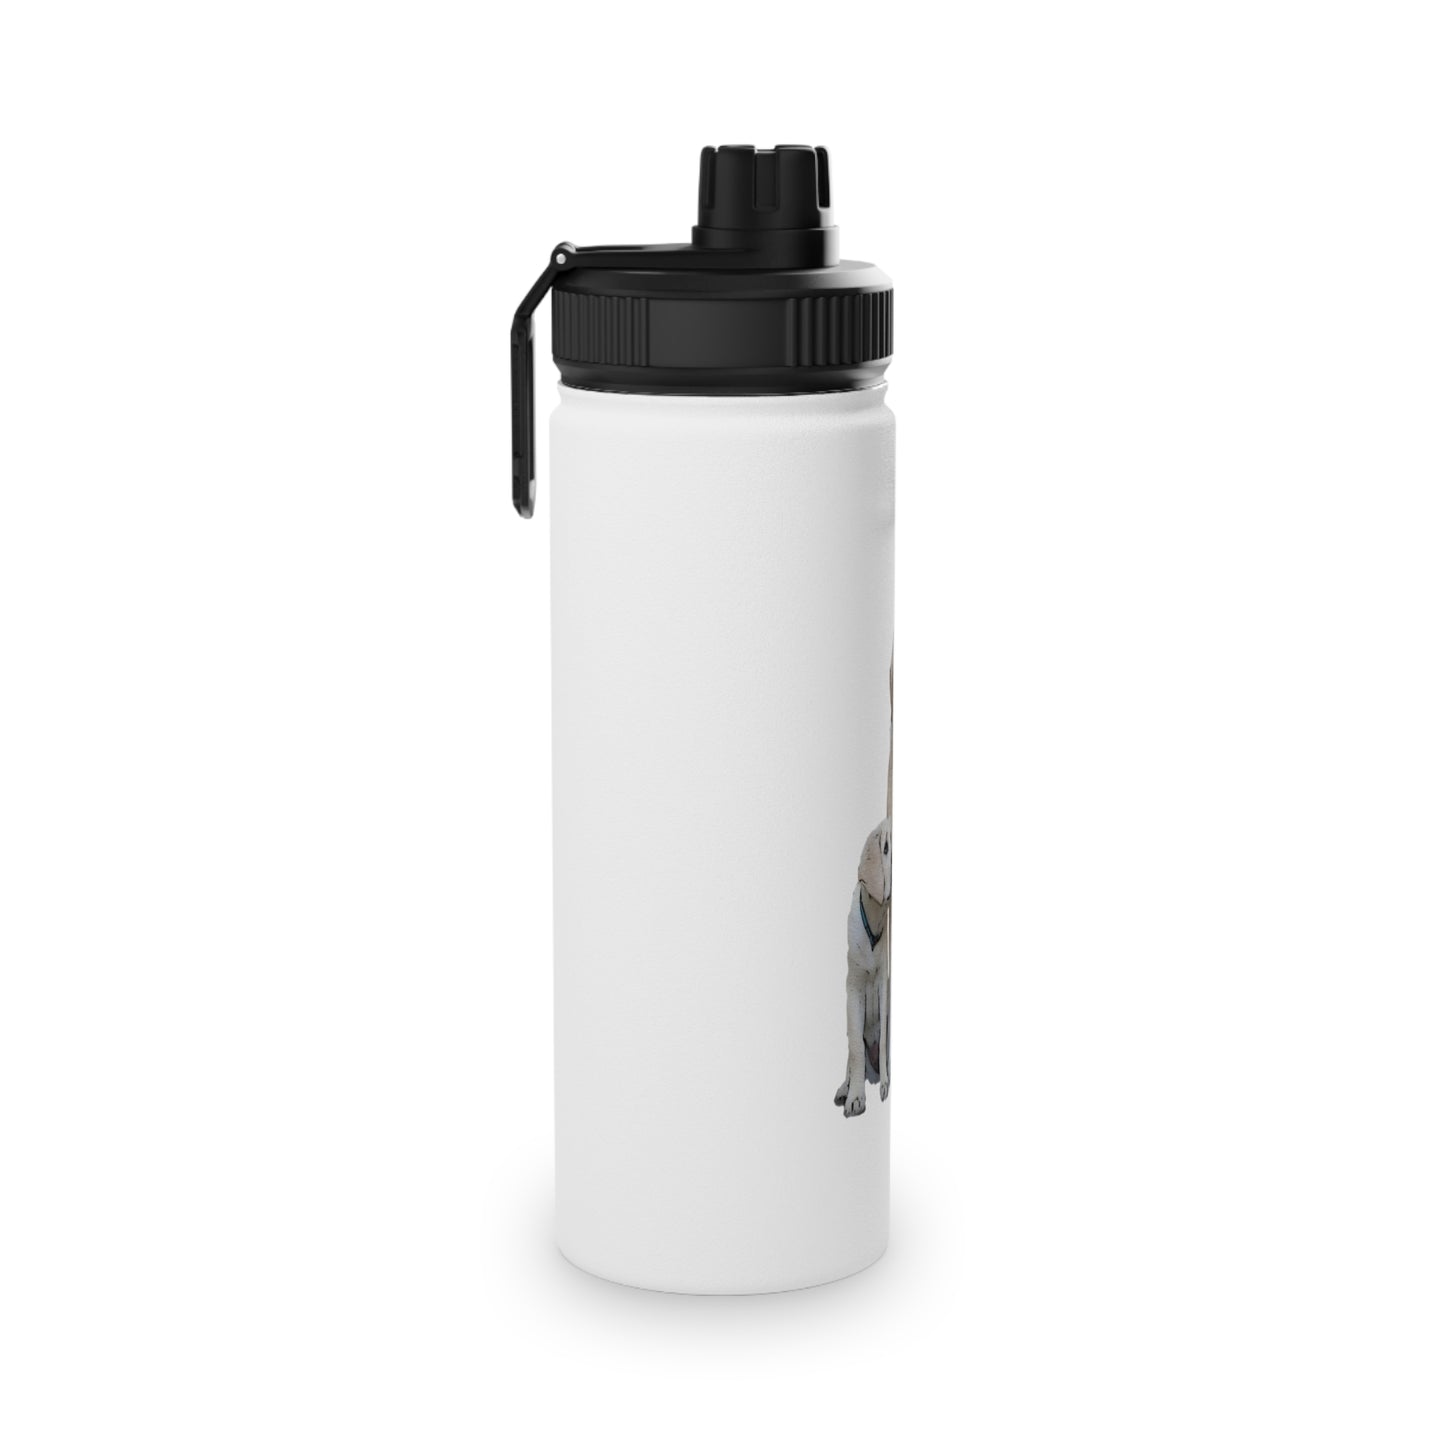 Dog & Pup Stainless Steel Water Bottle, Sports Lid